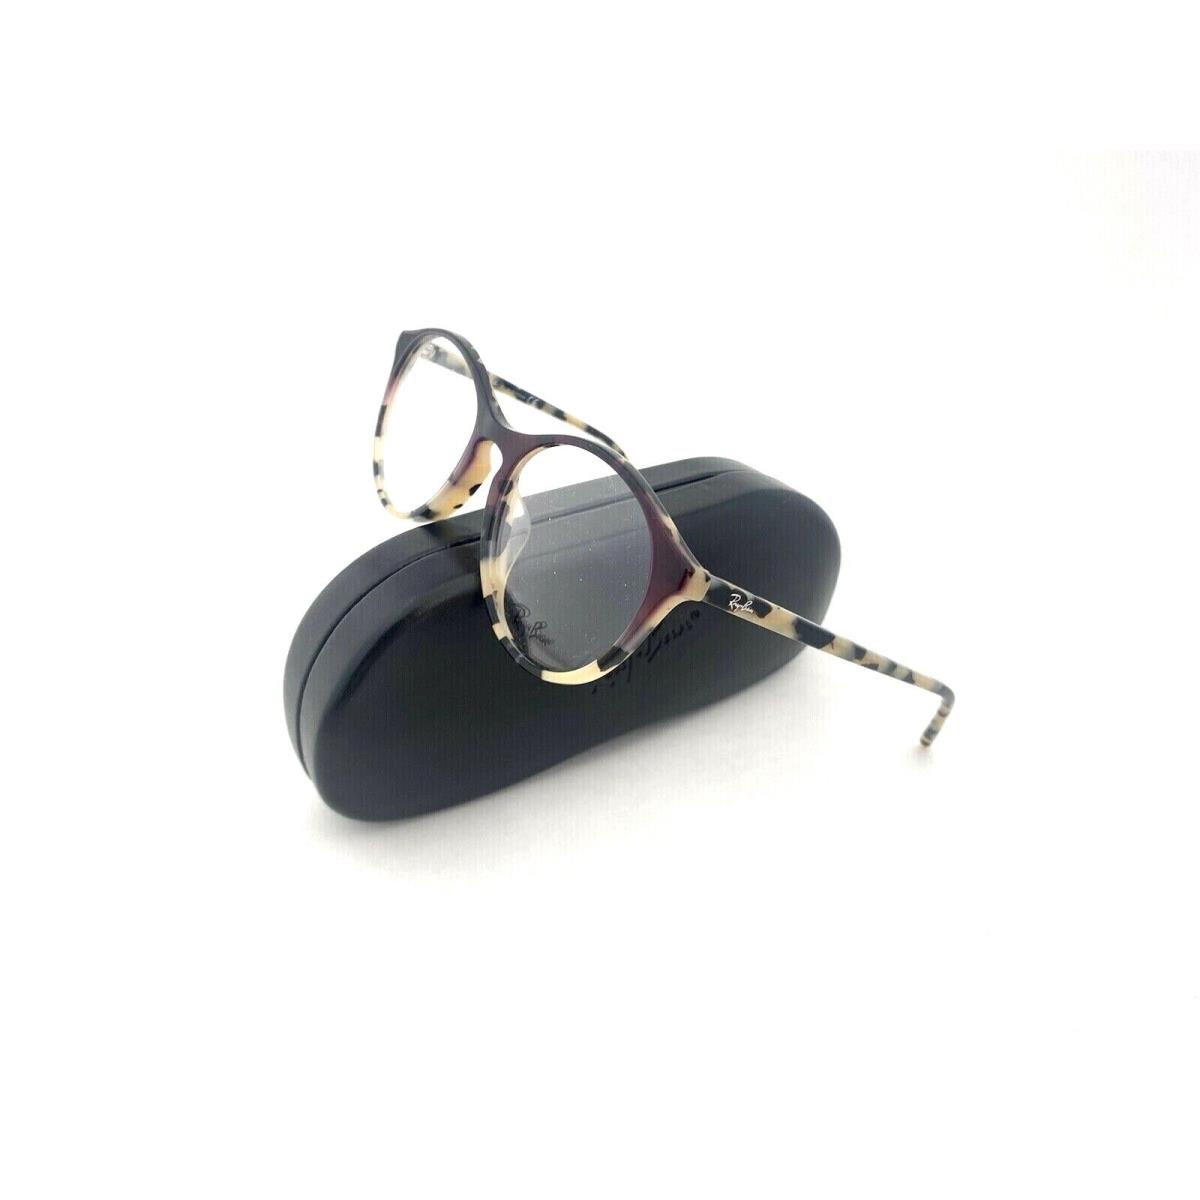 Ray-ban Frames Unisex Acetate Round RB5371F 5869 53 18 140 Leopard Violet